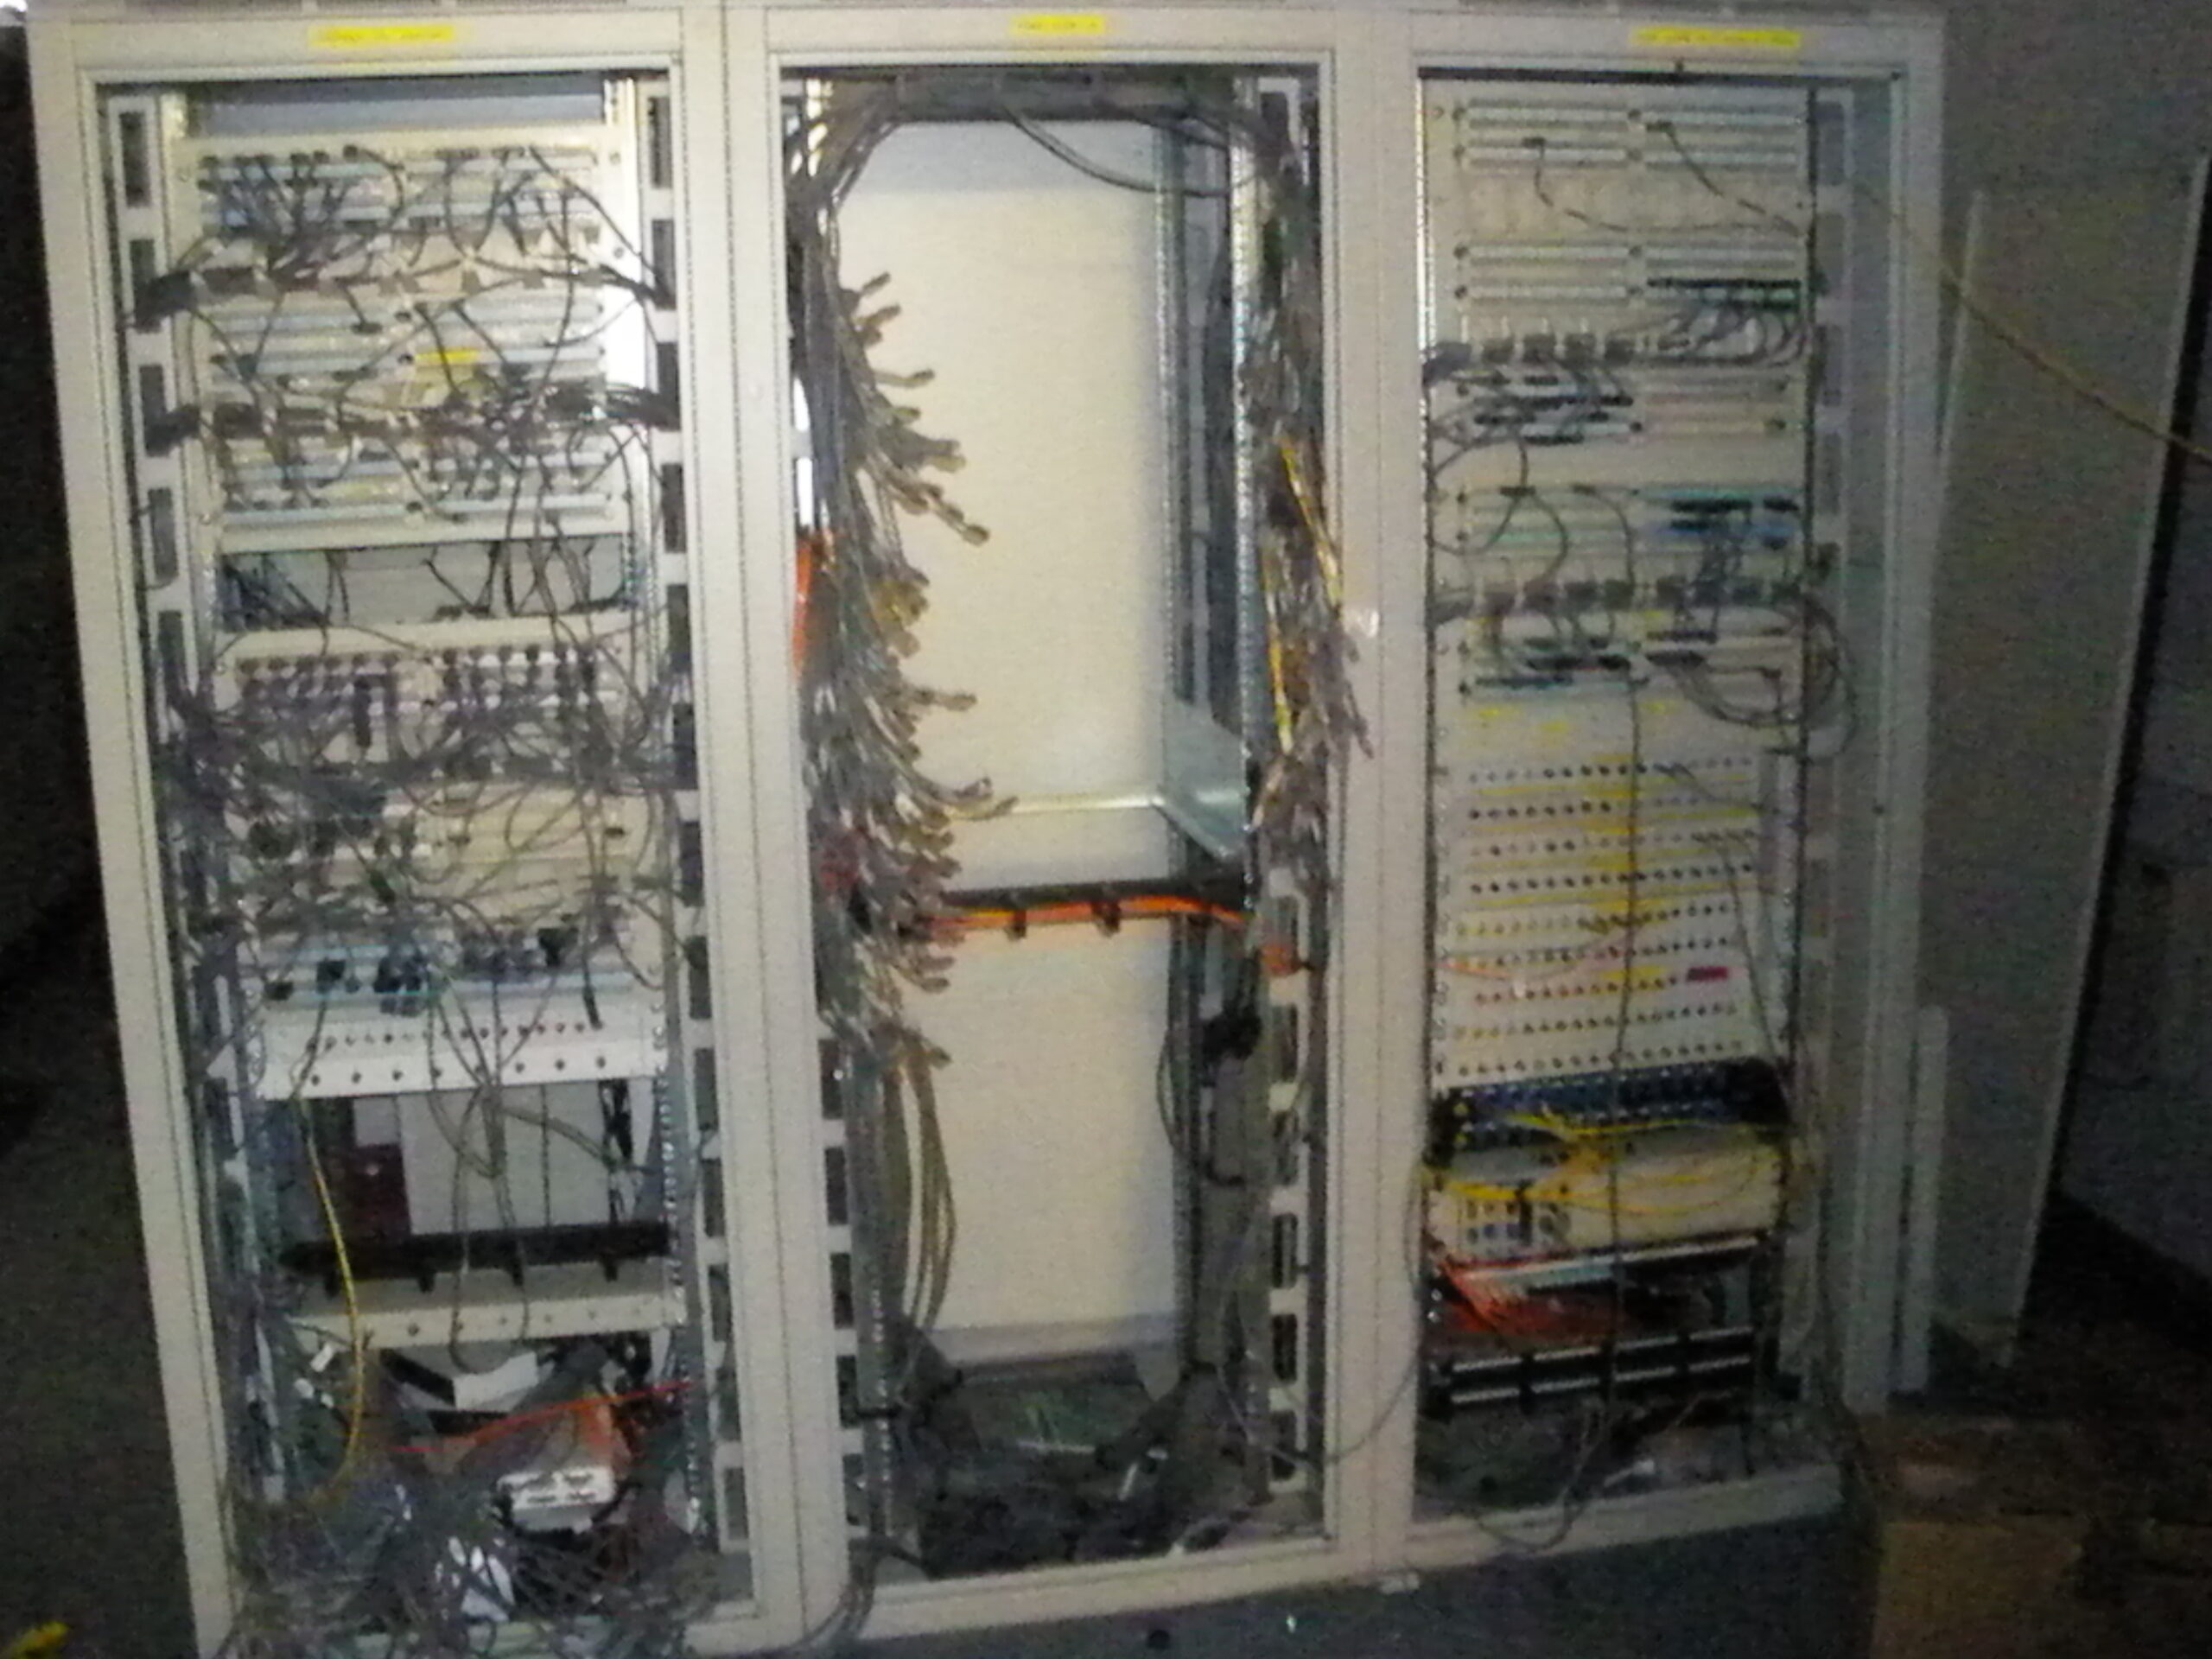 C016 computer room network cabinets, 13 Sep 2011